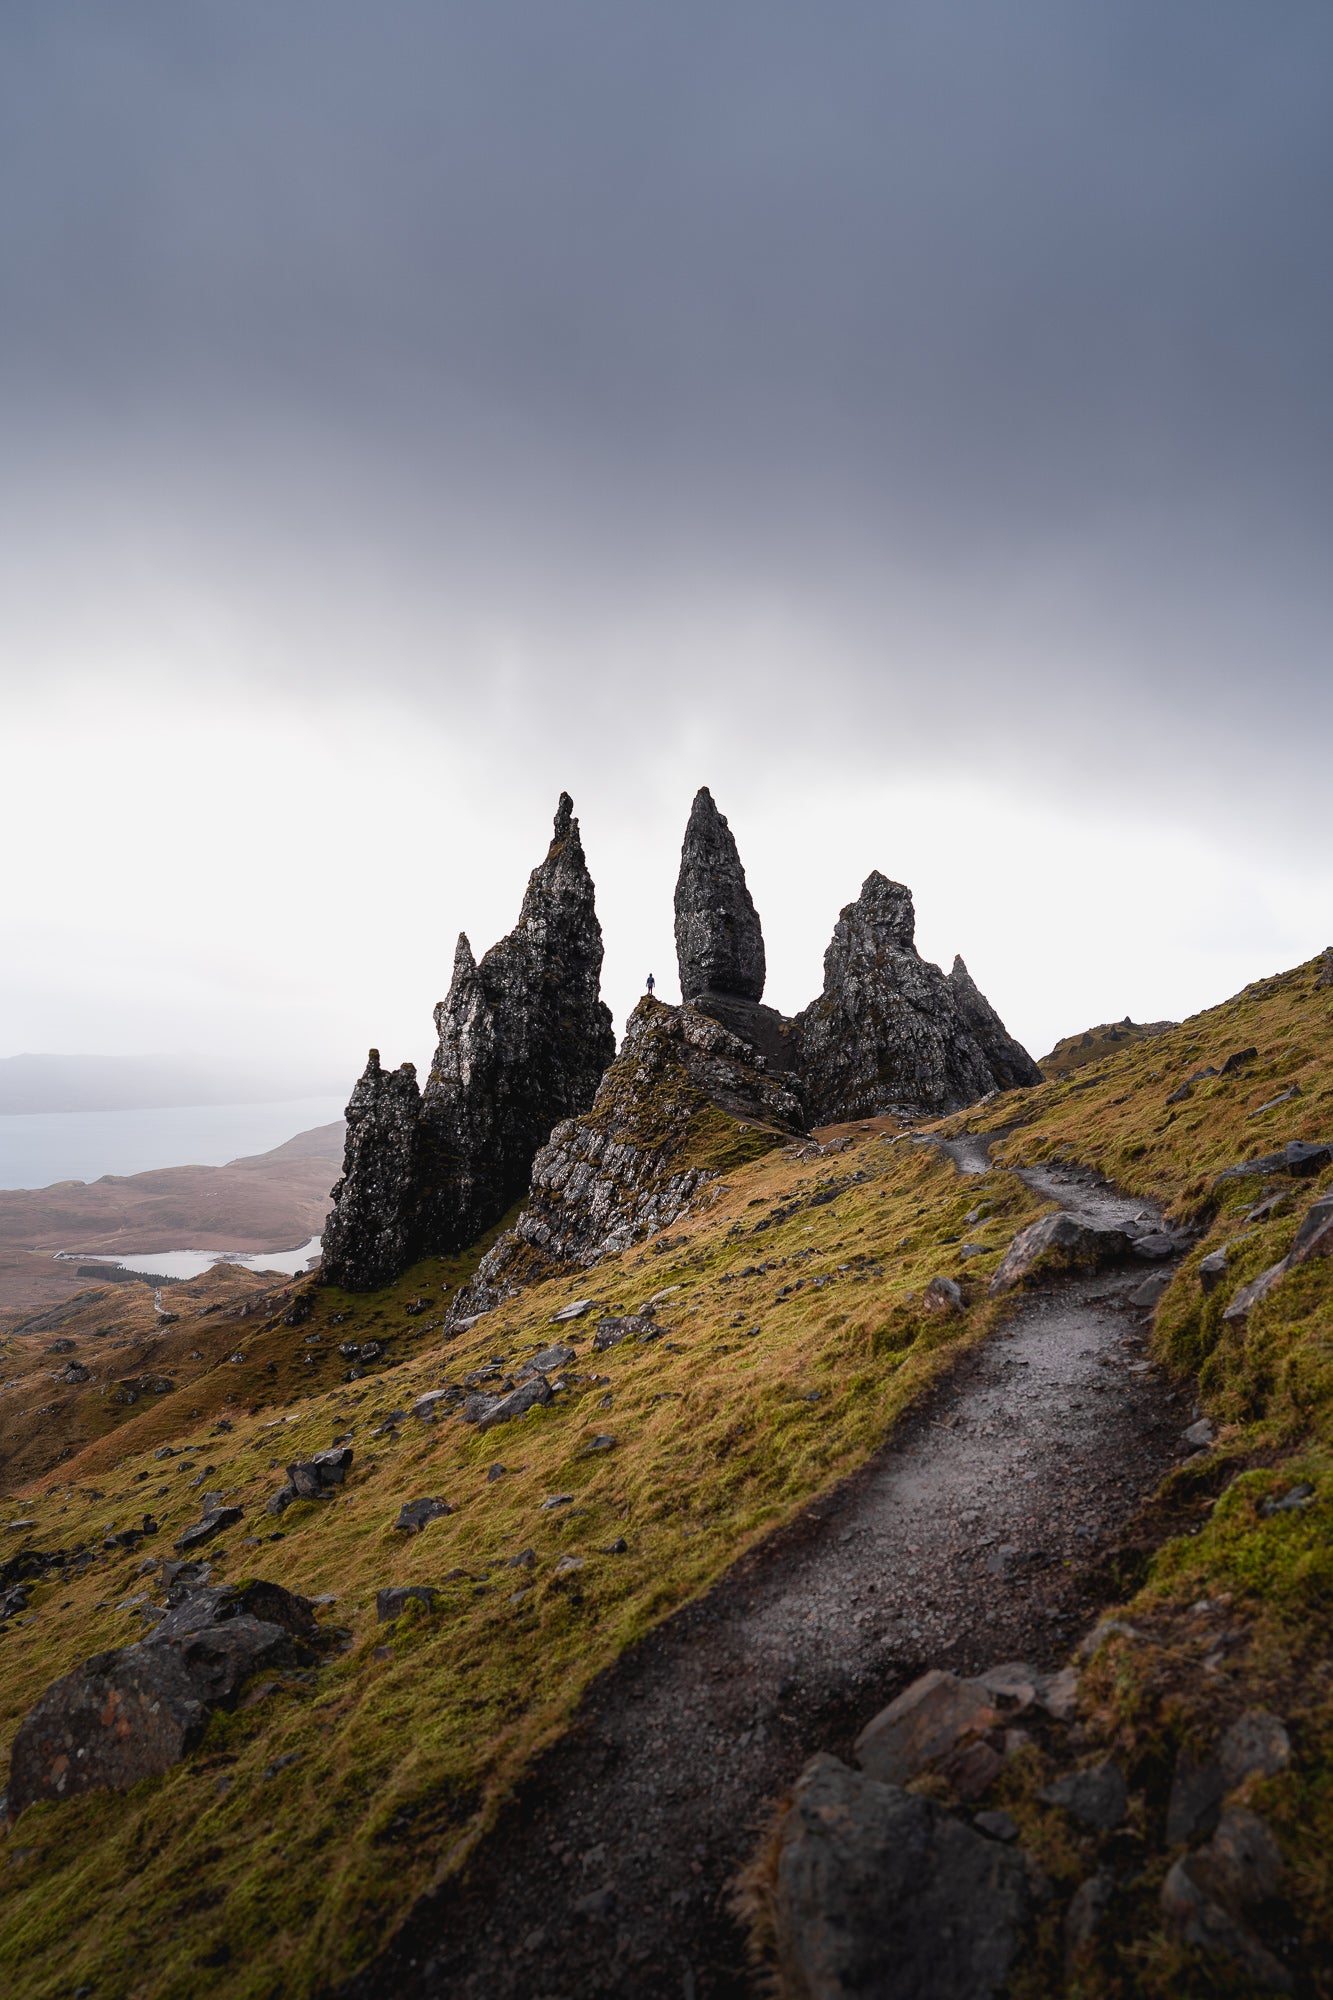 “The Old Man of Storr, a classic viewpoint from this landmark on the Isle of Skye.” Photo by Daryl Scott Walker. Sony Alpha 7 III. Sony 24mm f/1.4 G Master. 1/250-sec, f/2.8, ISO 125